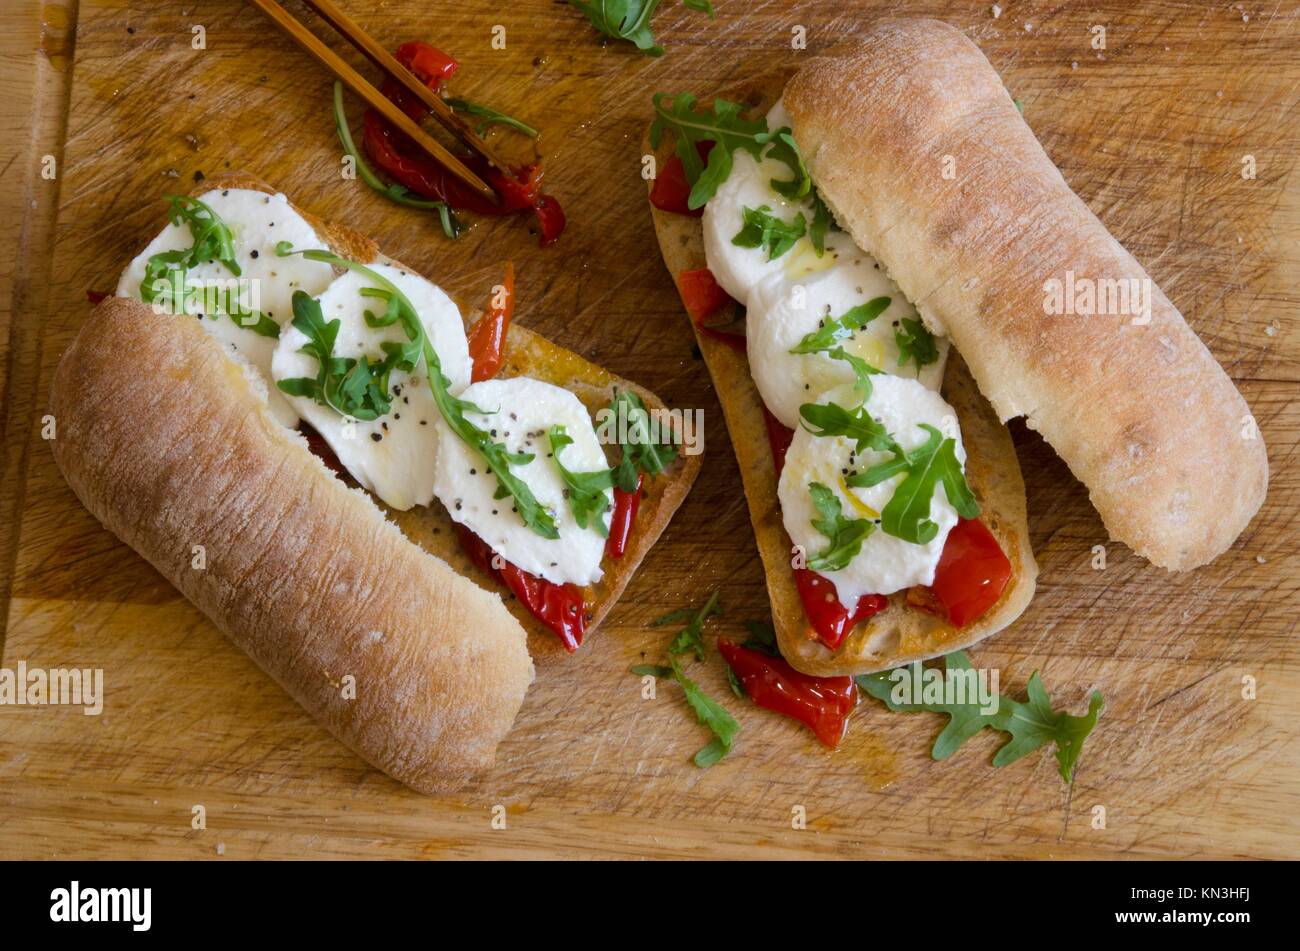 Toasted ciabattas filled with mozzarella, rocket and roasted peppers. Stock Photo